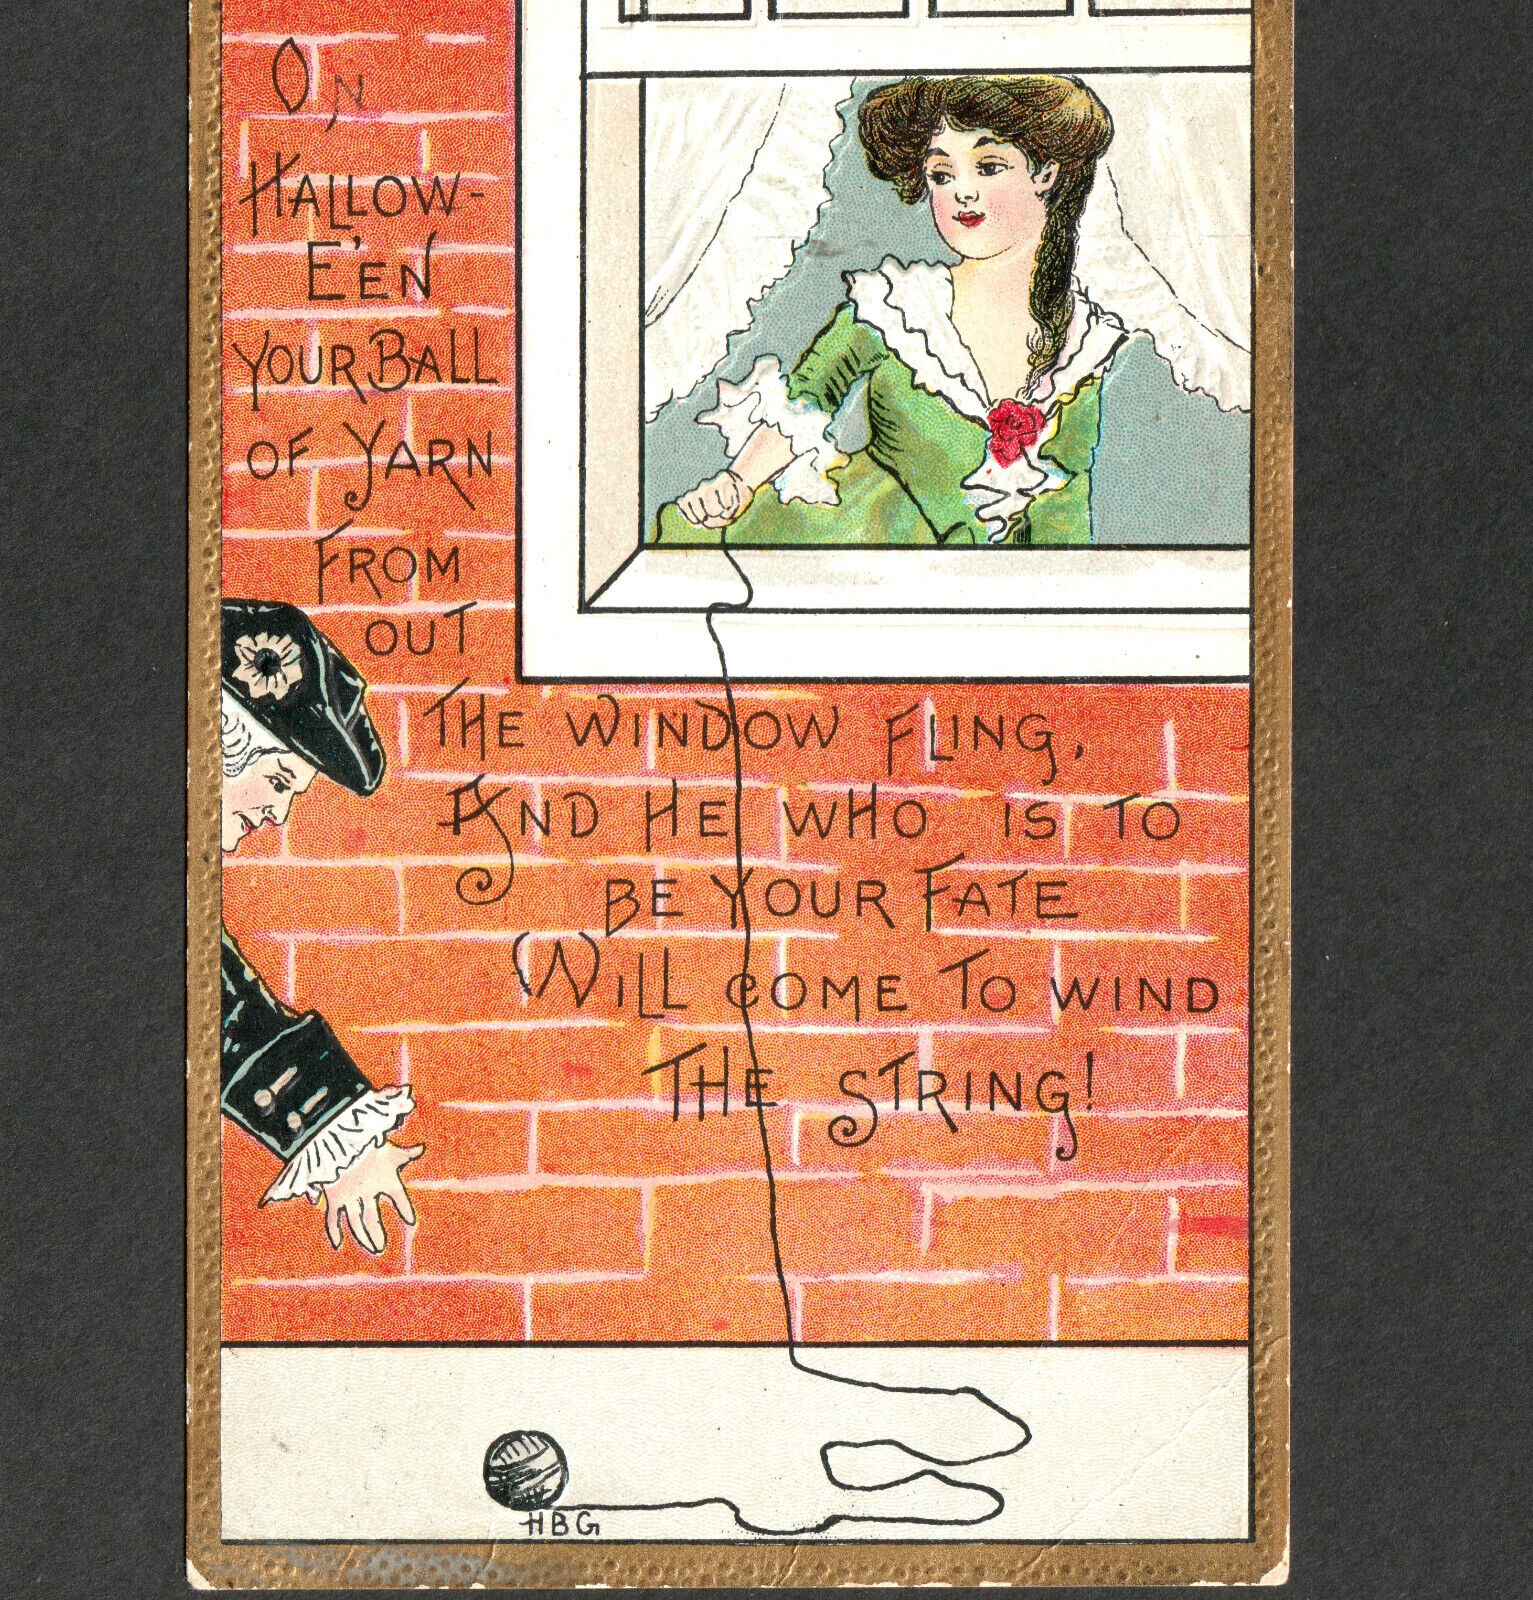 HBG Griggs 1911 On Halloween Your Ball of Yarn Fling Love Fate L&E 2262 PostCard